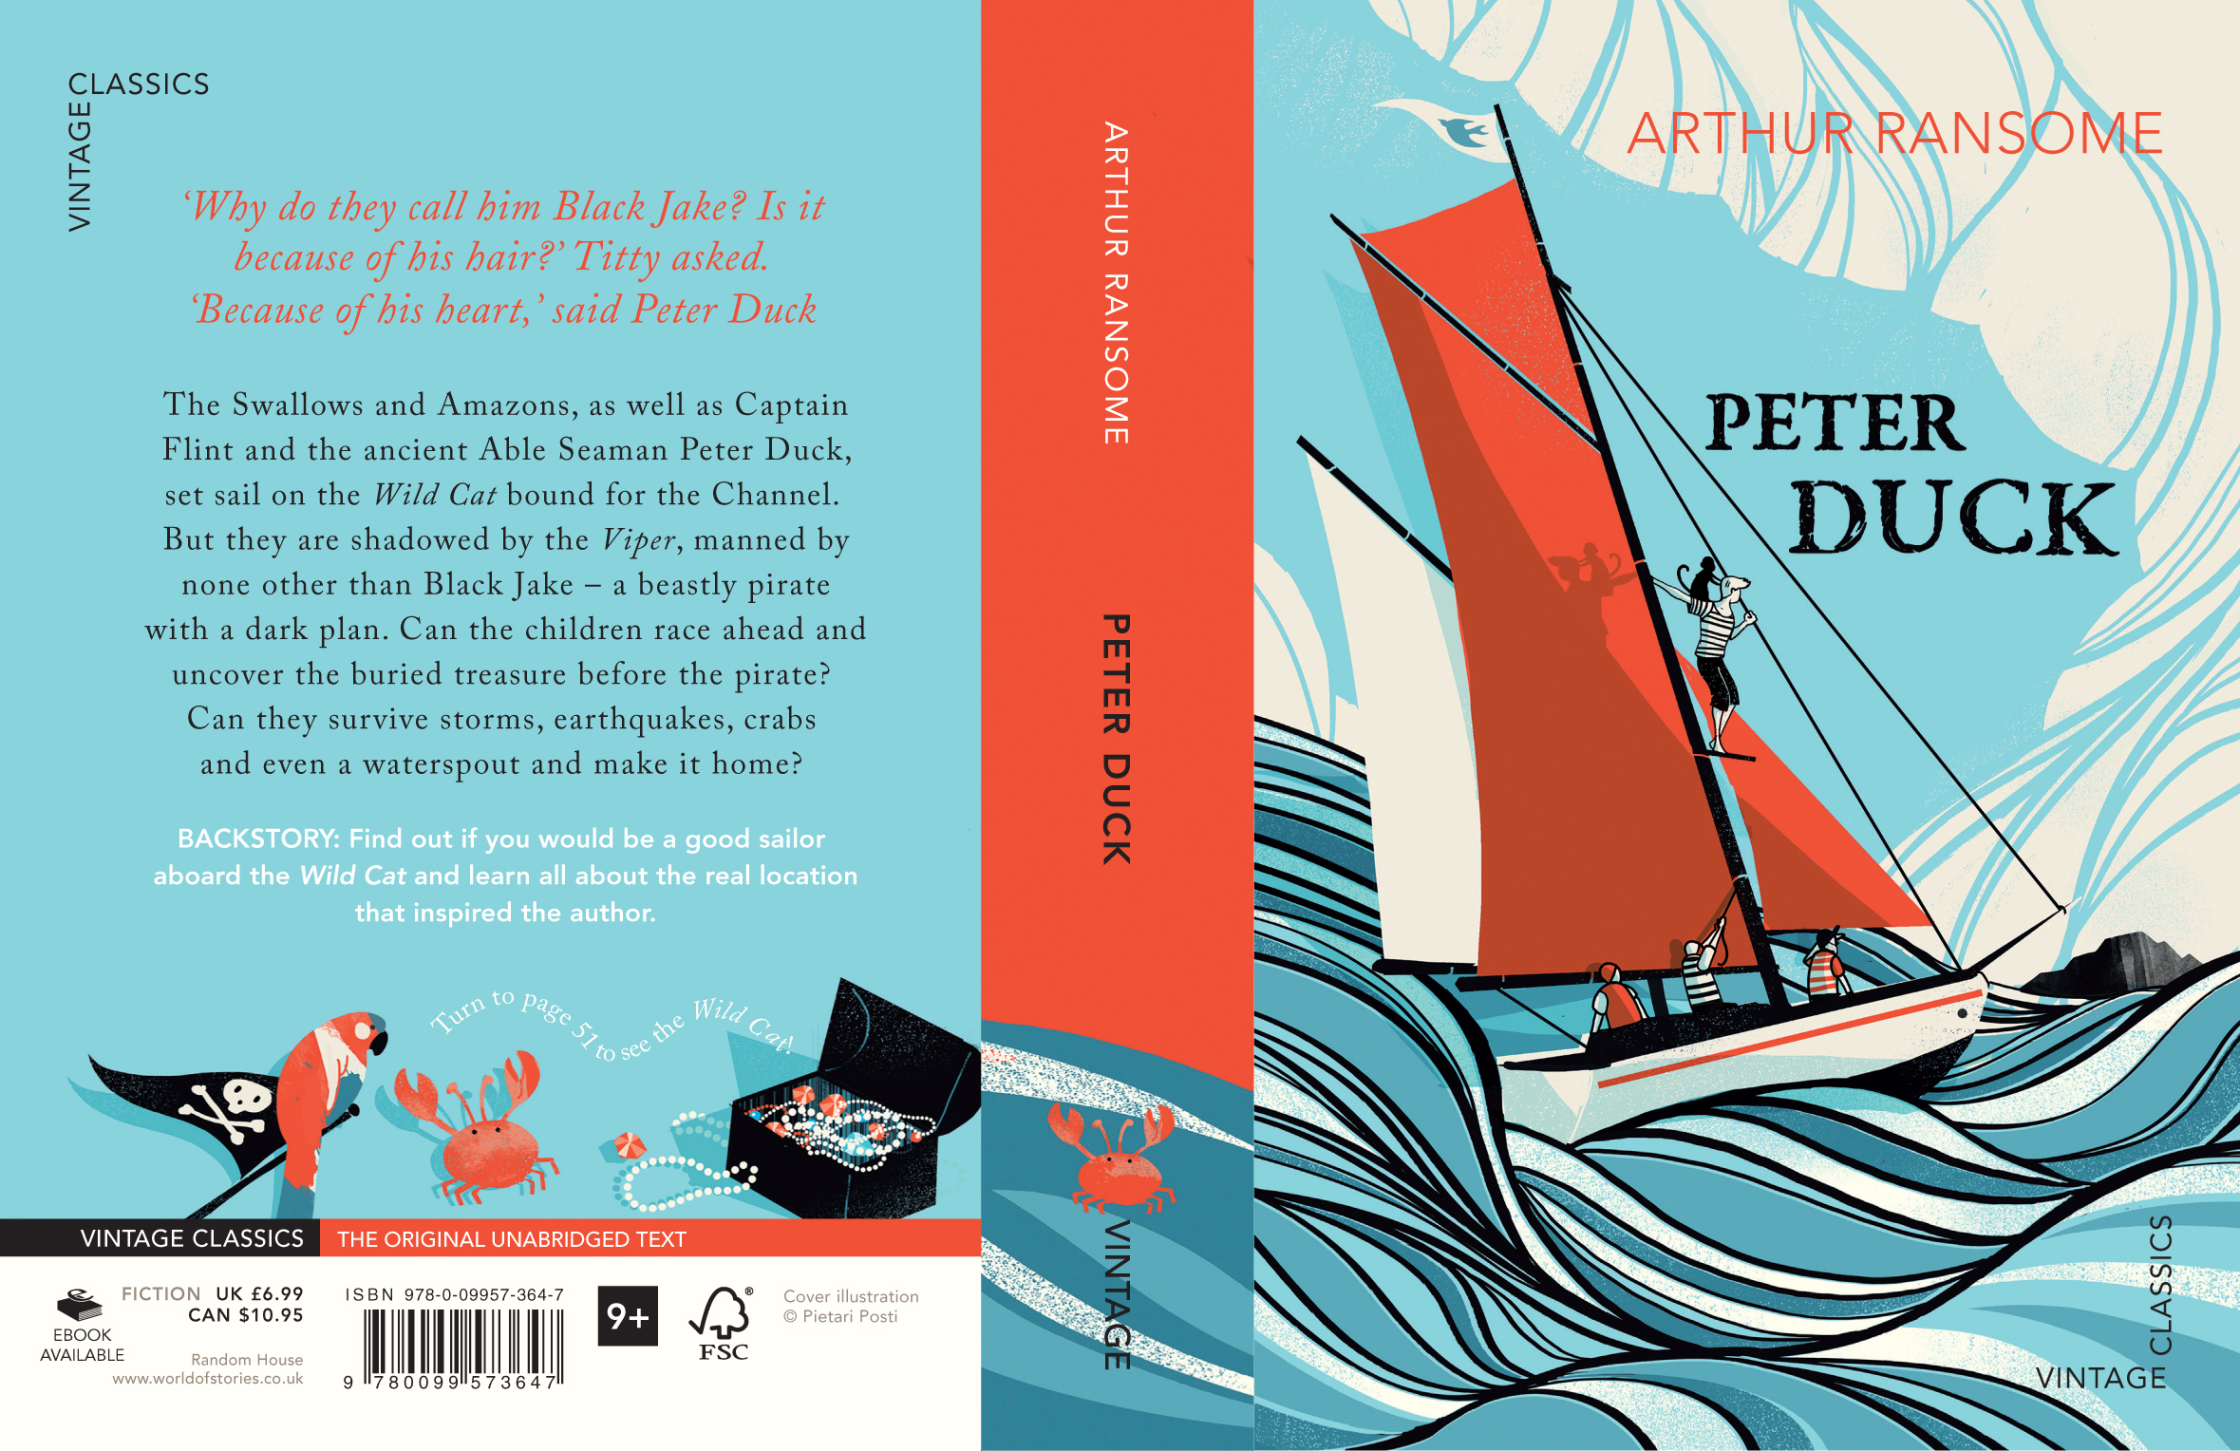 Arthur Ransome - Peter Duck Cover